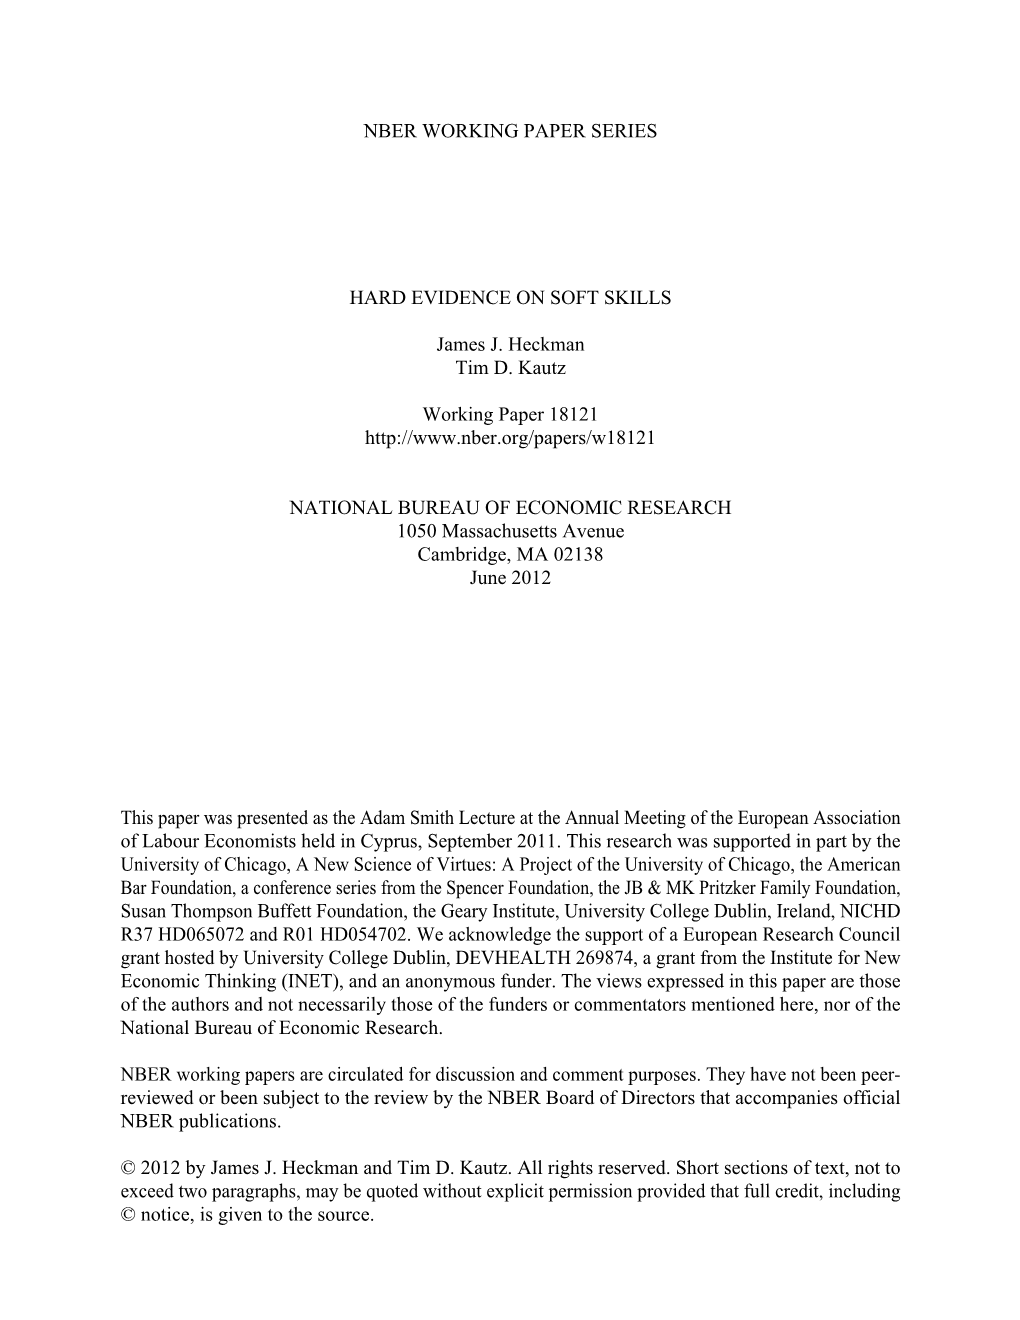 Nber Working Paper Series Hard Evidence on Soft